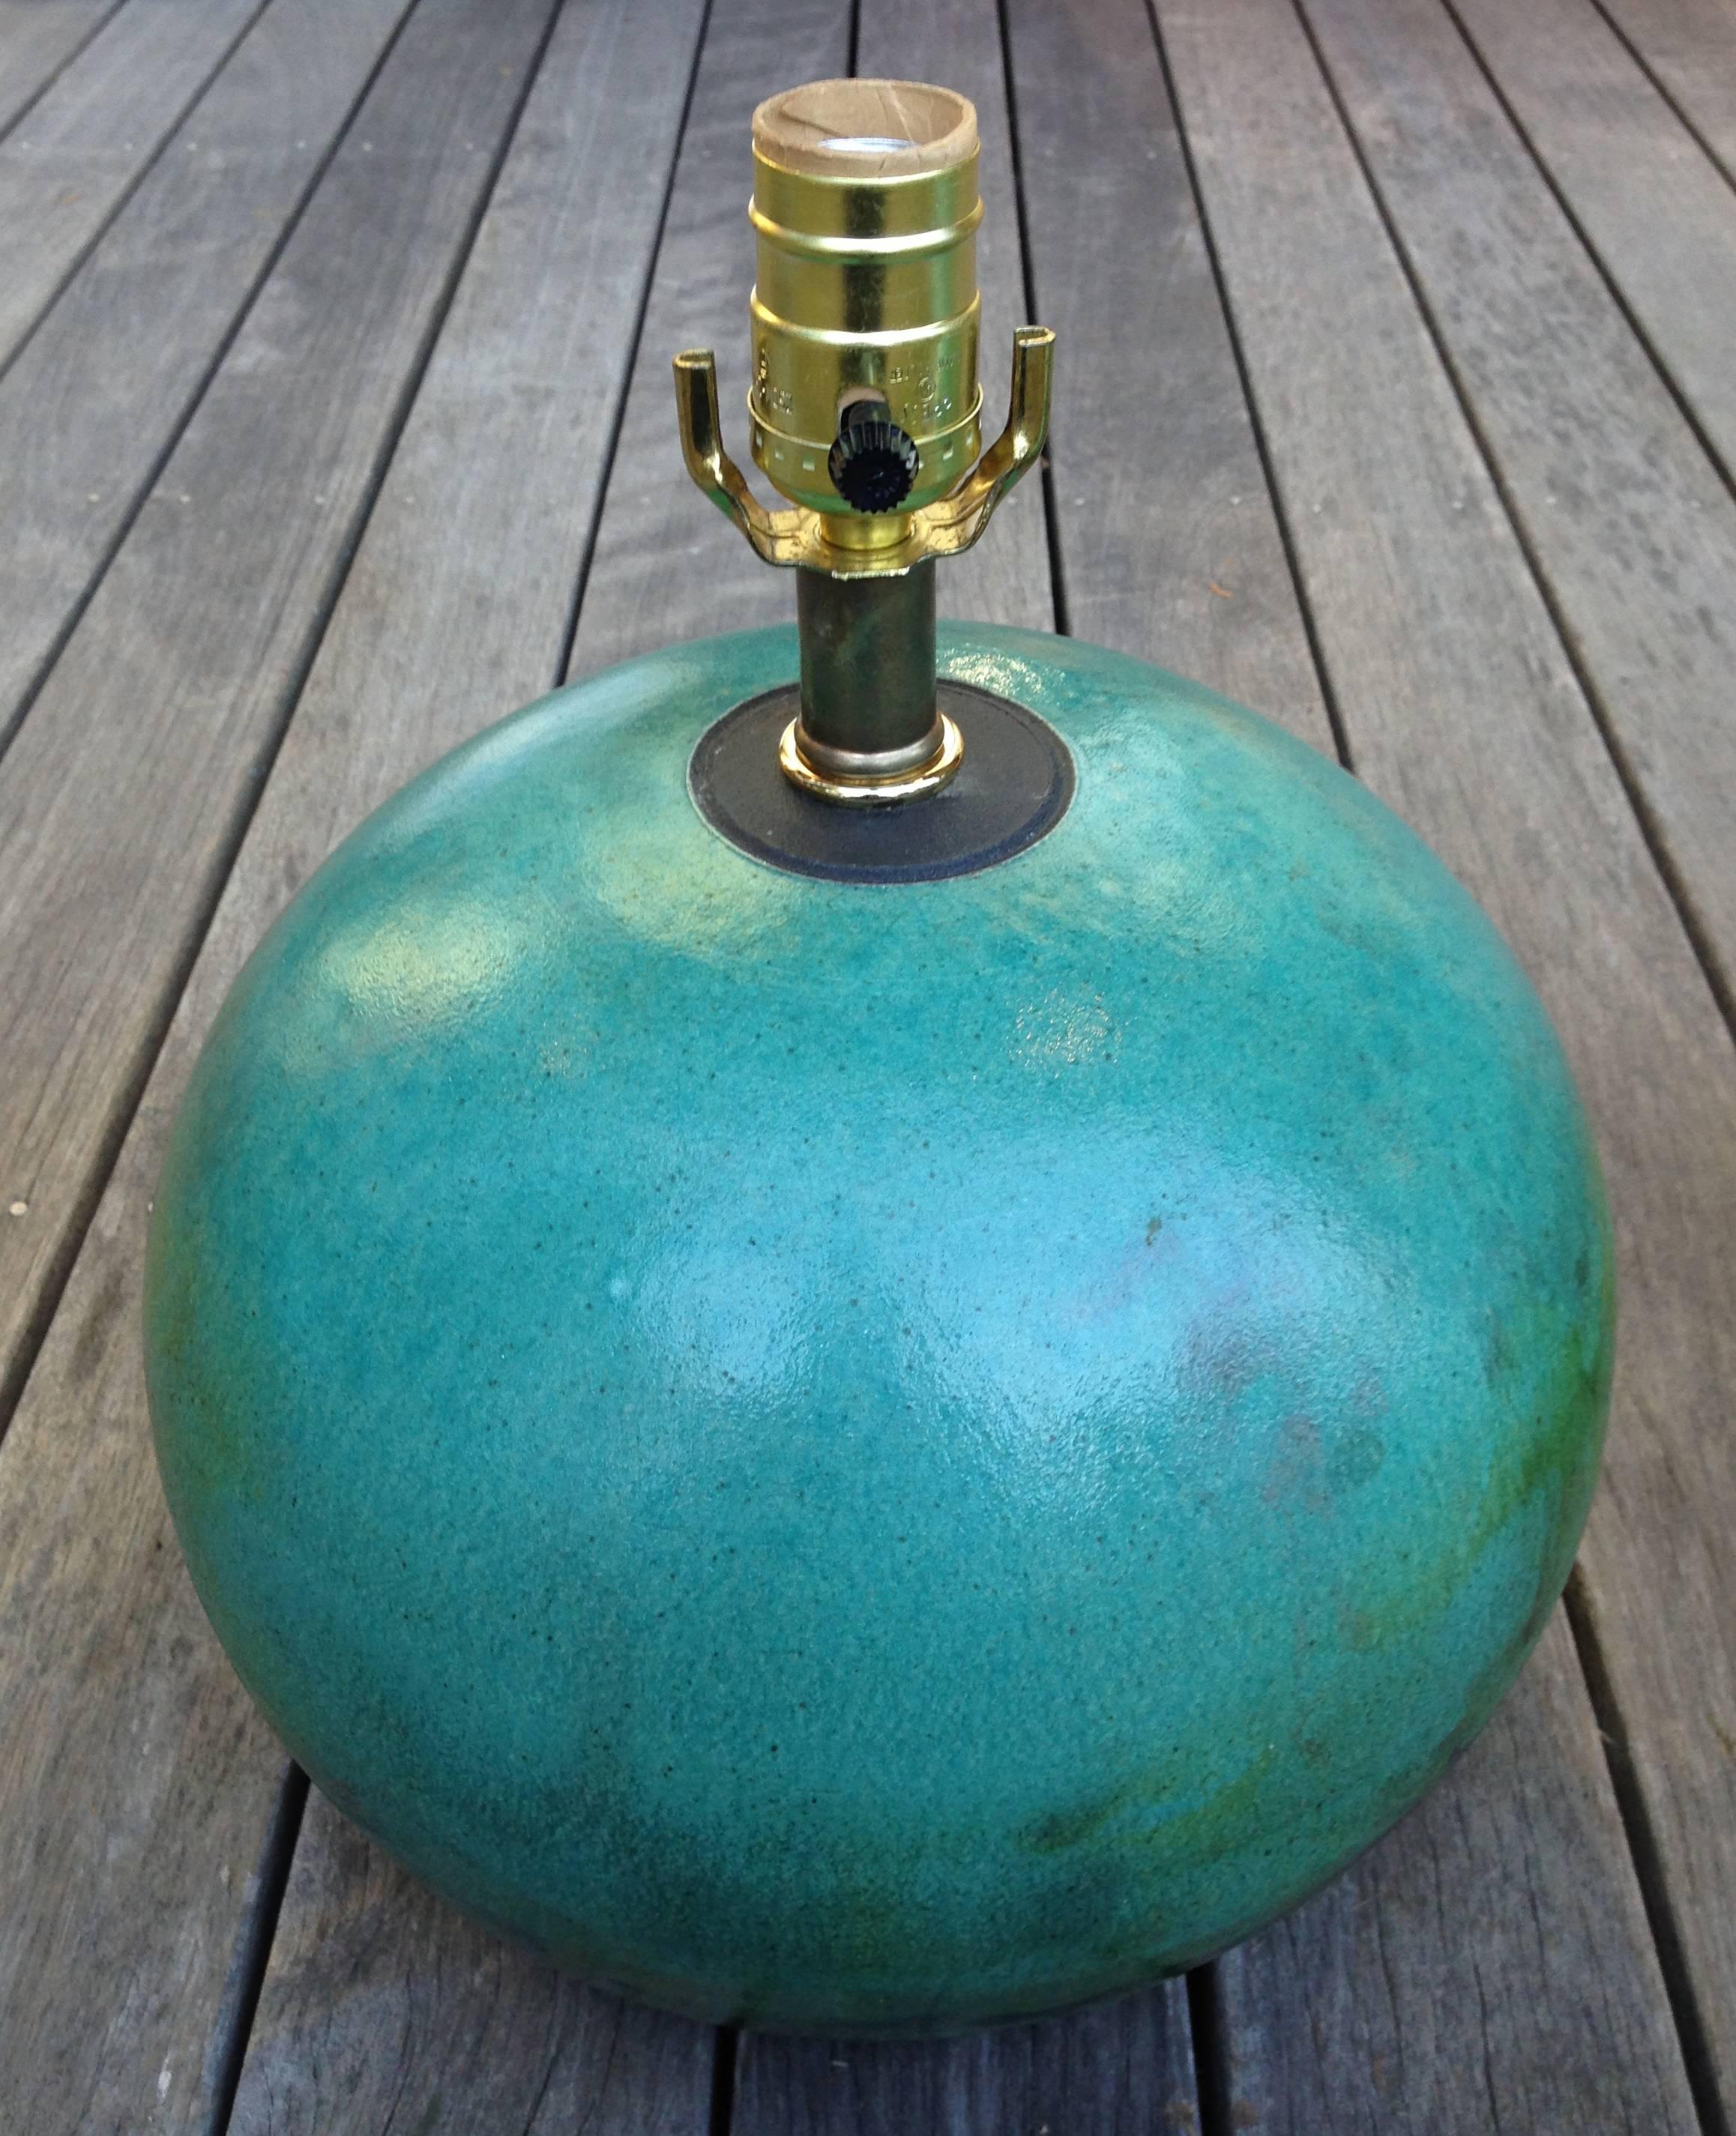 A pair of Raku pottery lamps in a vibrant sea foam green palette, late 20th century.

Measures: 11.5" W x 14" (top of socket) / 9" (top of sphere) H.